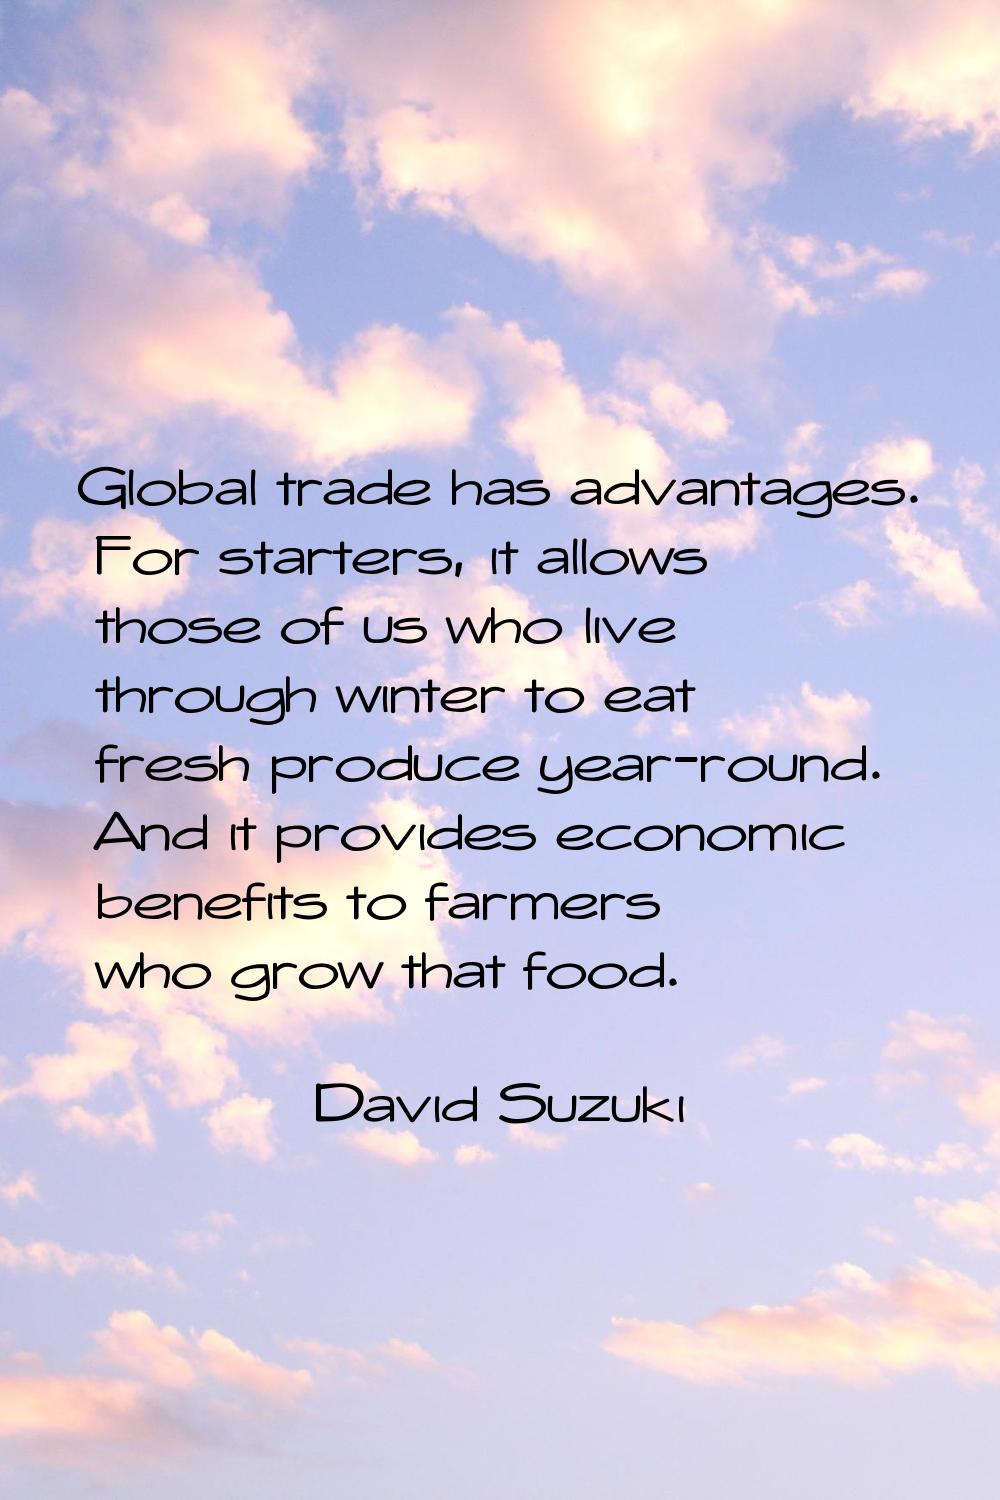 Global trade has advantages. For starters, it allows those of us who live through winter to eat fre